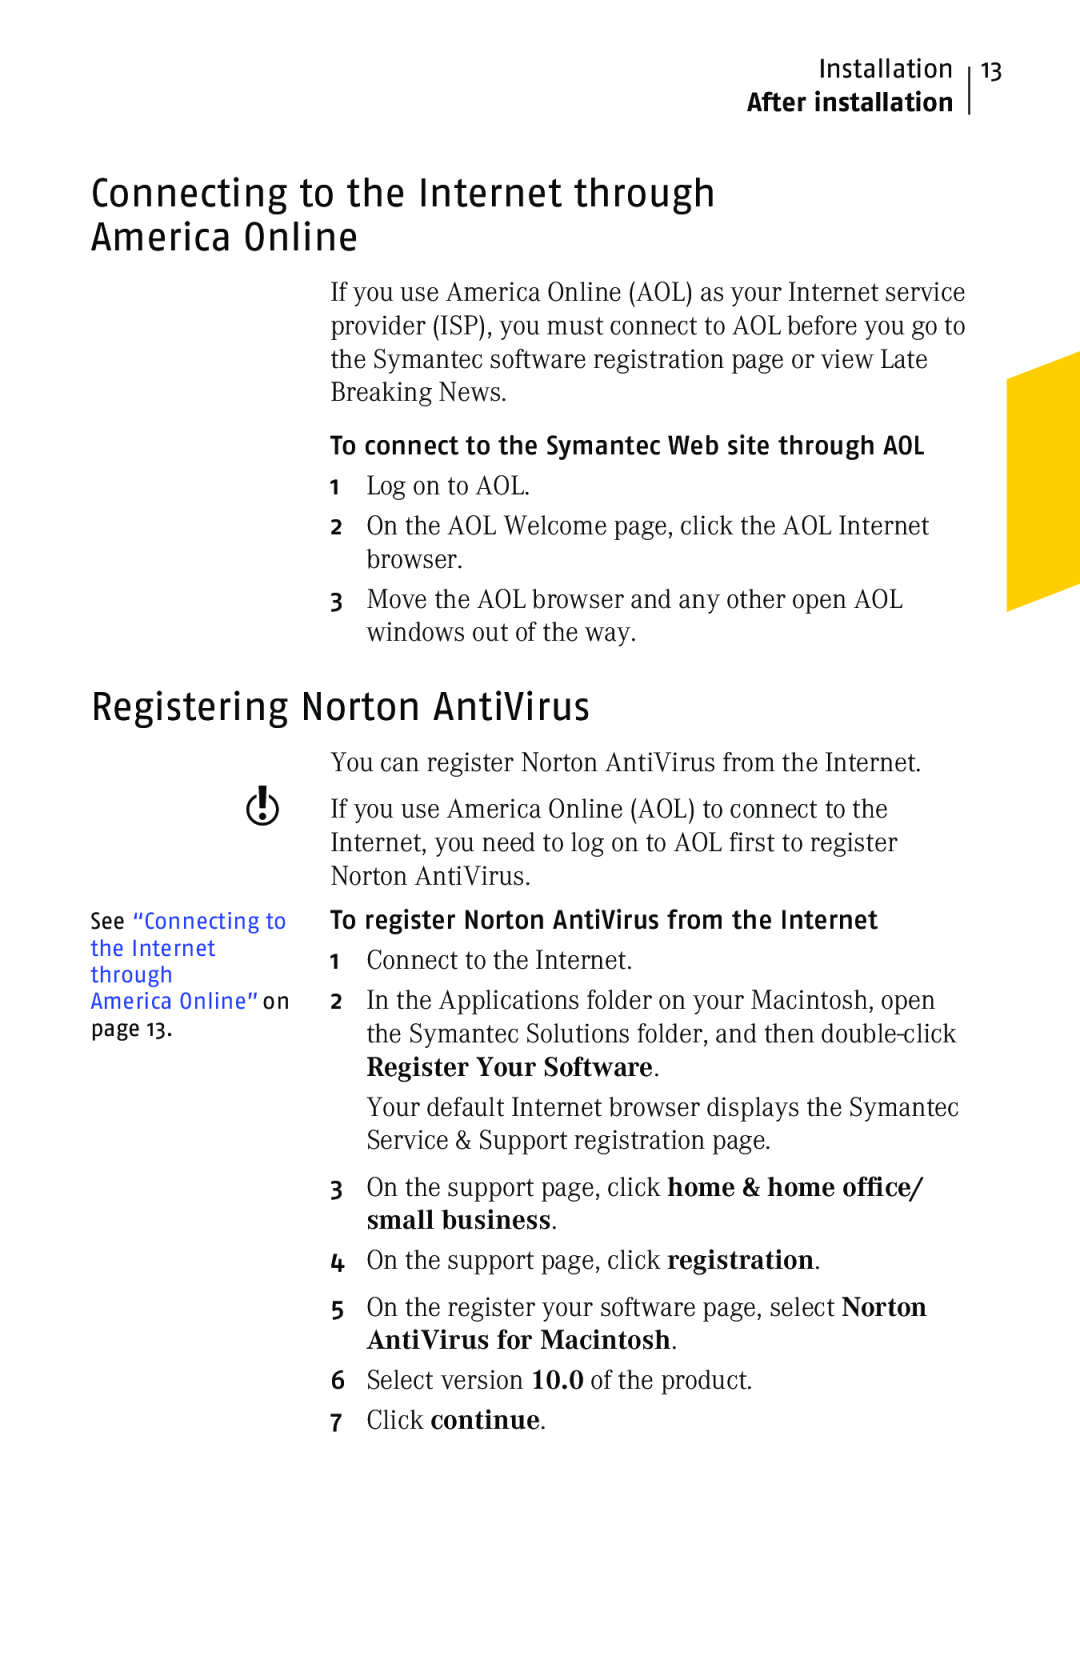 Symantec 10 manual Connecting to the Internet through America Online, Registering Norton AntiVirus, After installation 